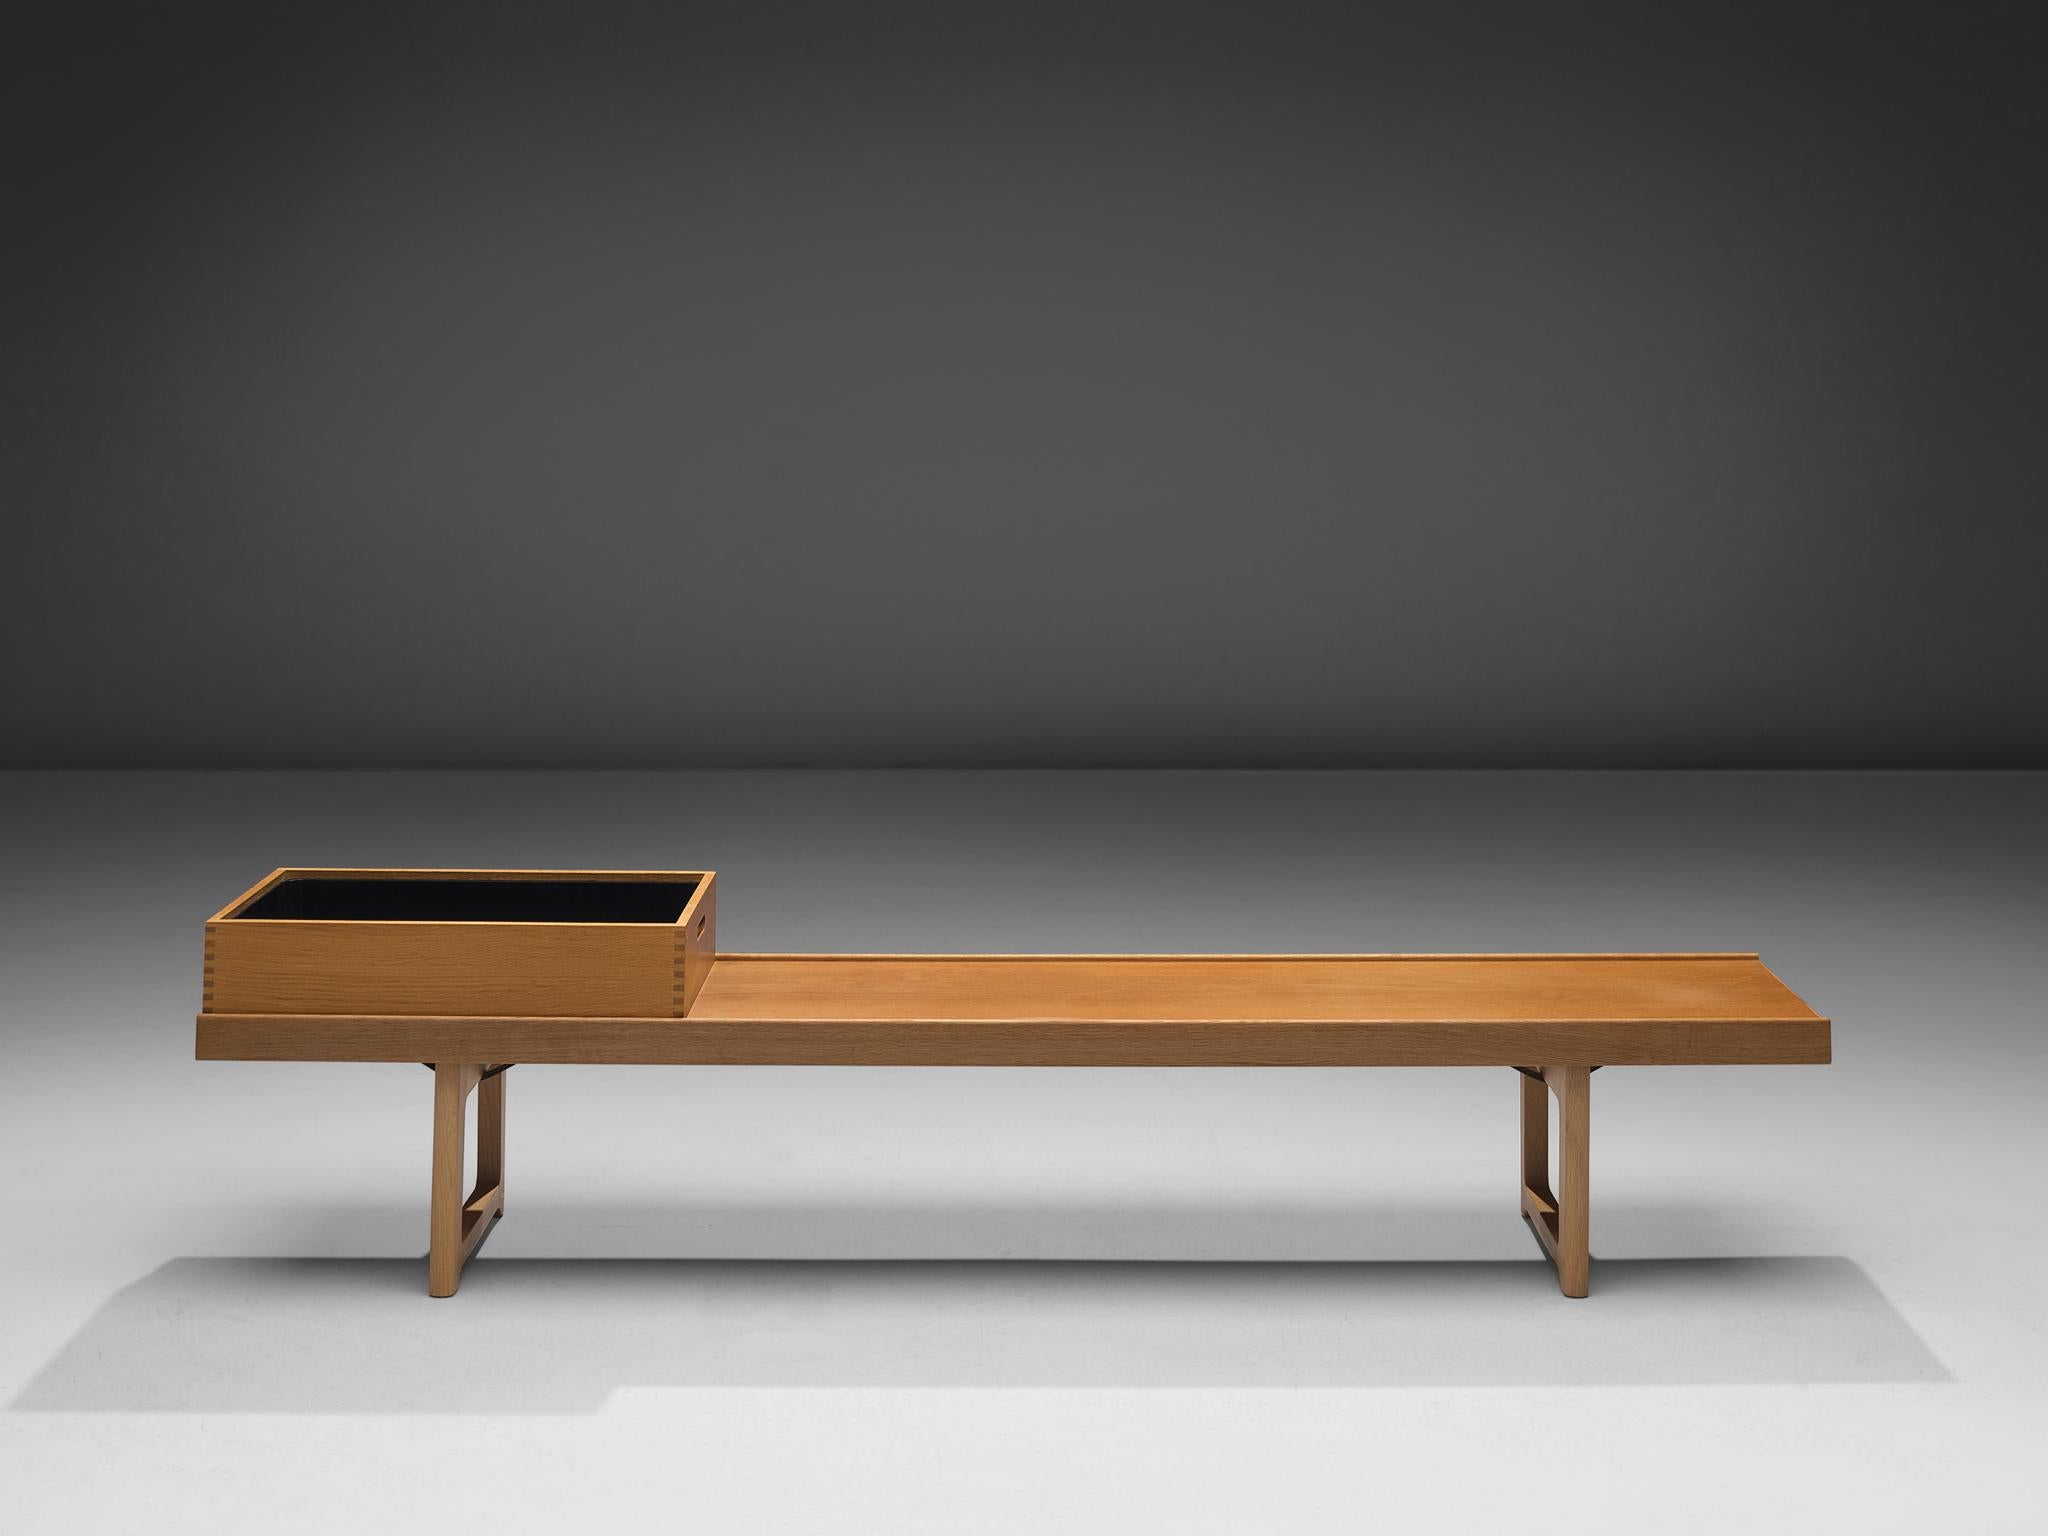 Torbjørn Afdal for Burksbo Mellemstrands Trevareindistri AS, 'Krobo' bench, oak, Norway, 1960s

This classic bench by Afdal is executed in oak and comes with one tray. The piece is stamped manufacturer's mark to each element. The piece is one of the